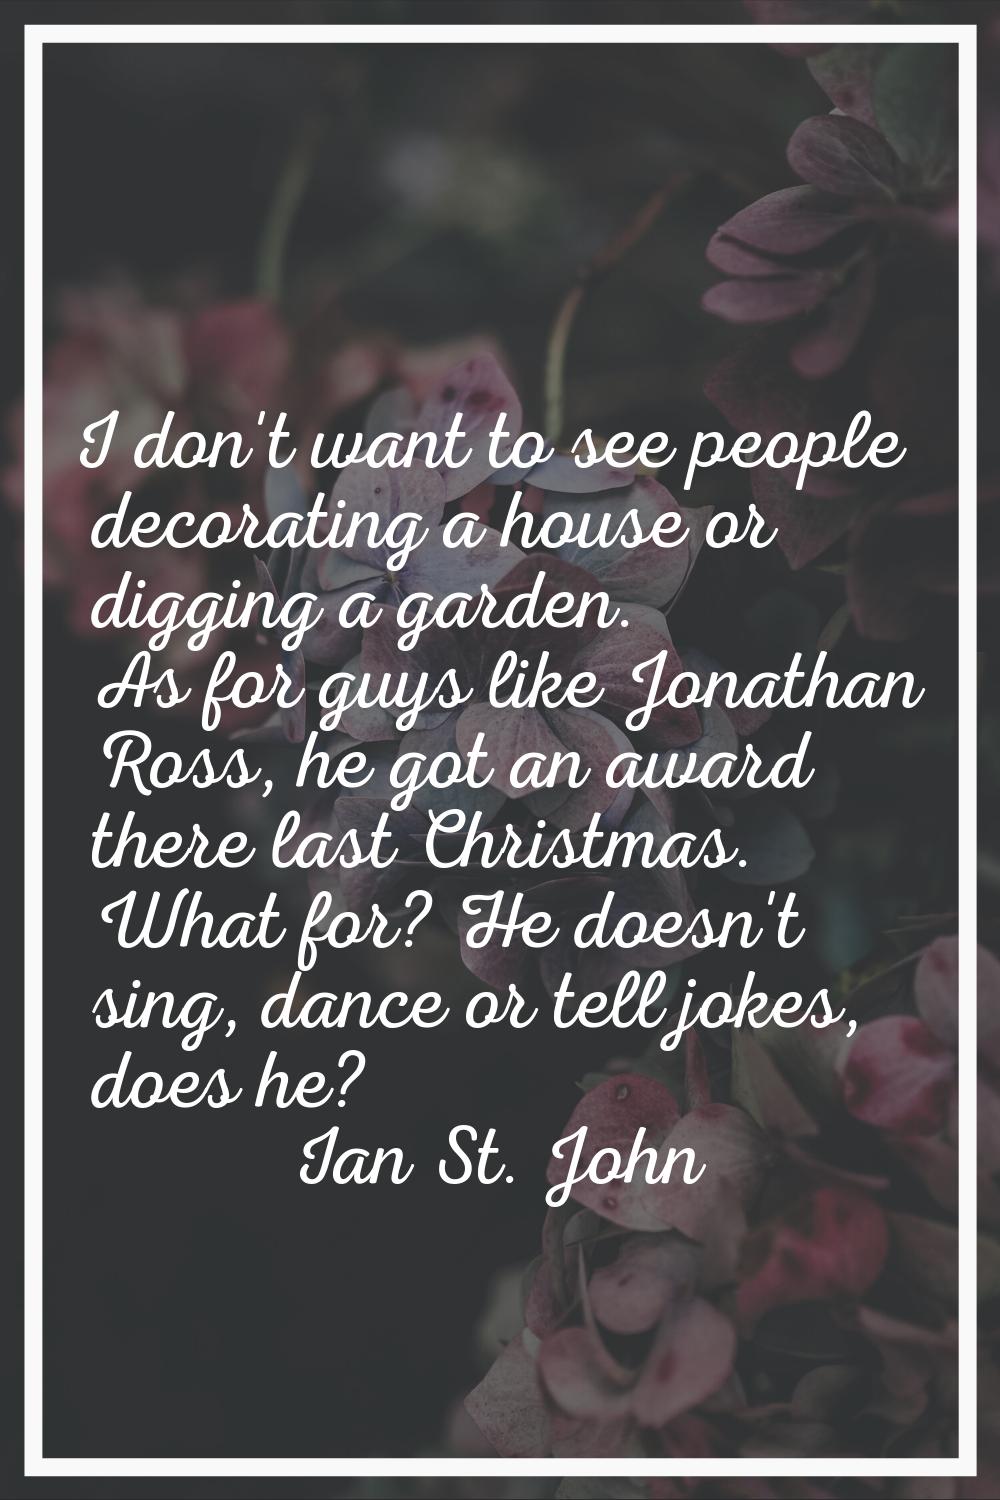 I don't want to see people decorating a house or digging a garden. As for guys like Jonathan Ross, 